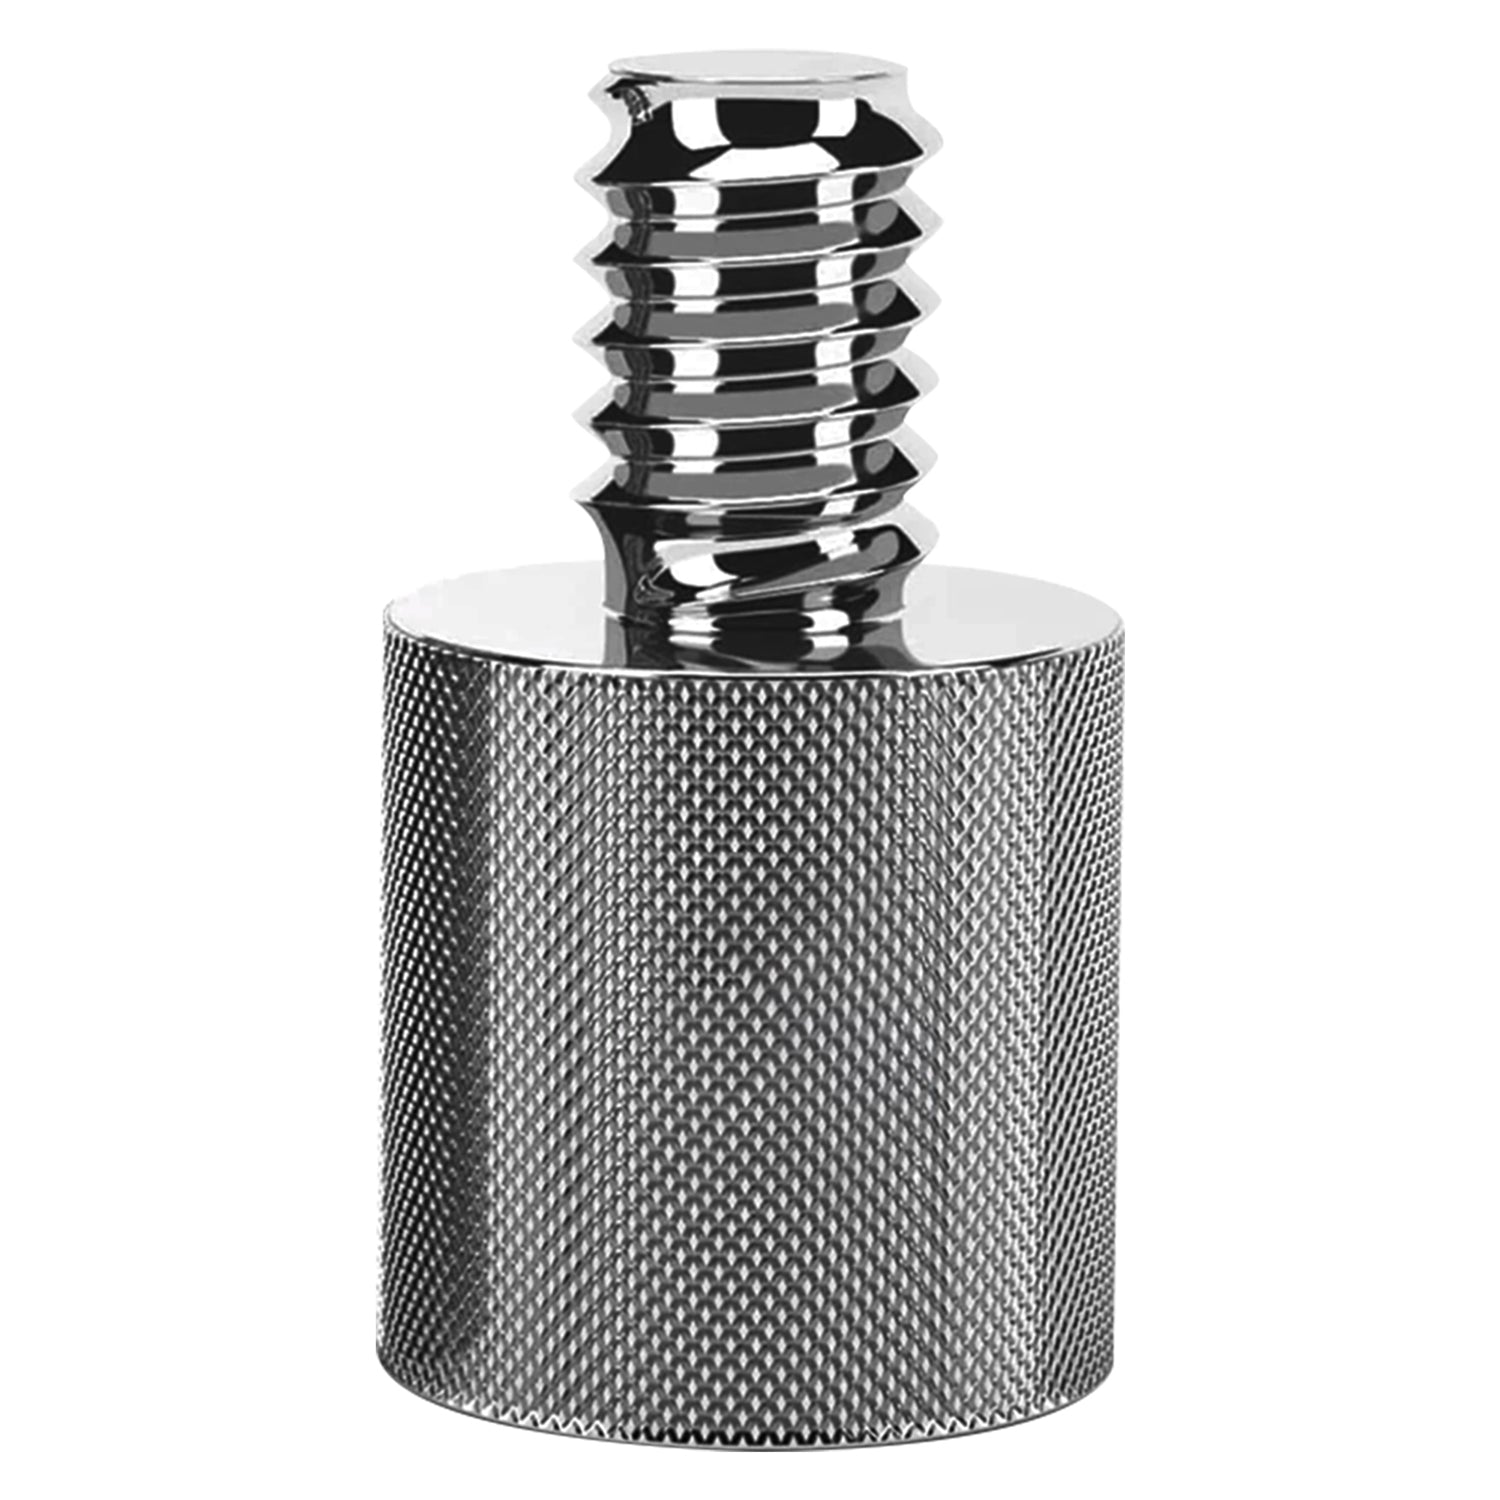 5Core 12 Pcs Mic Stand Adapter  5/8 Female to 1/4" Male Screw Adapter  w Knurled Surface Thread Adopter